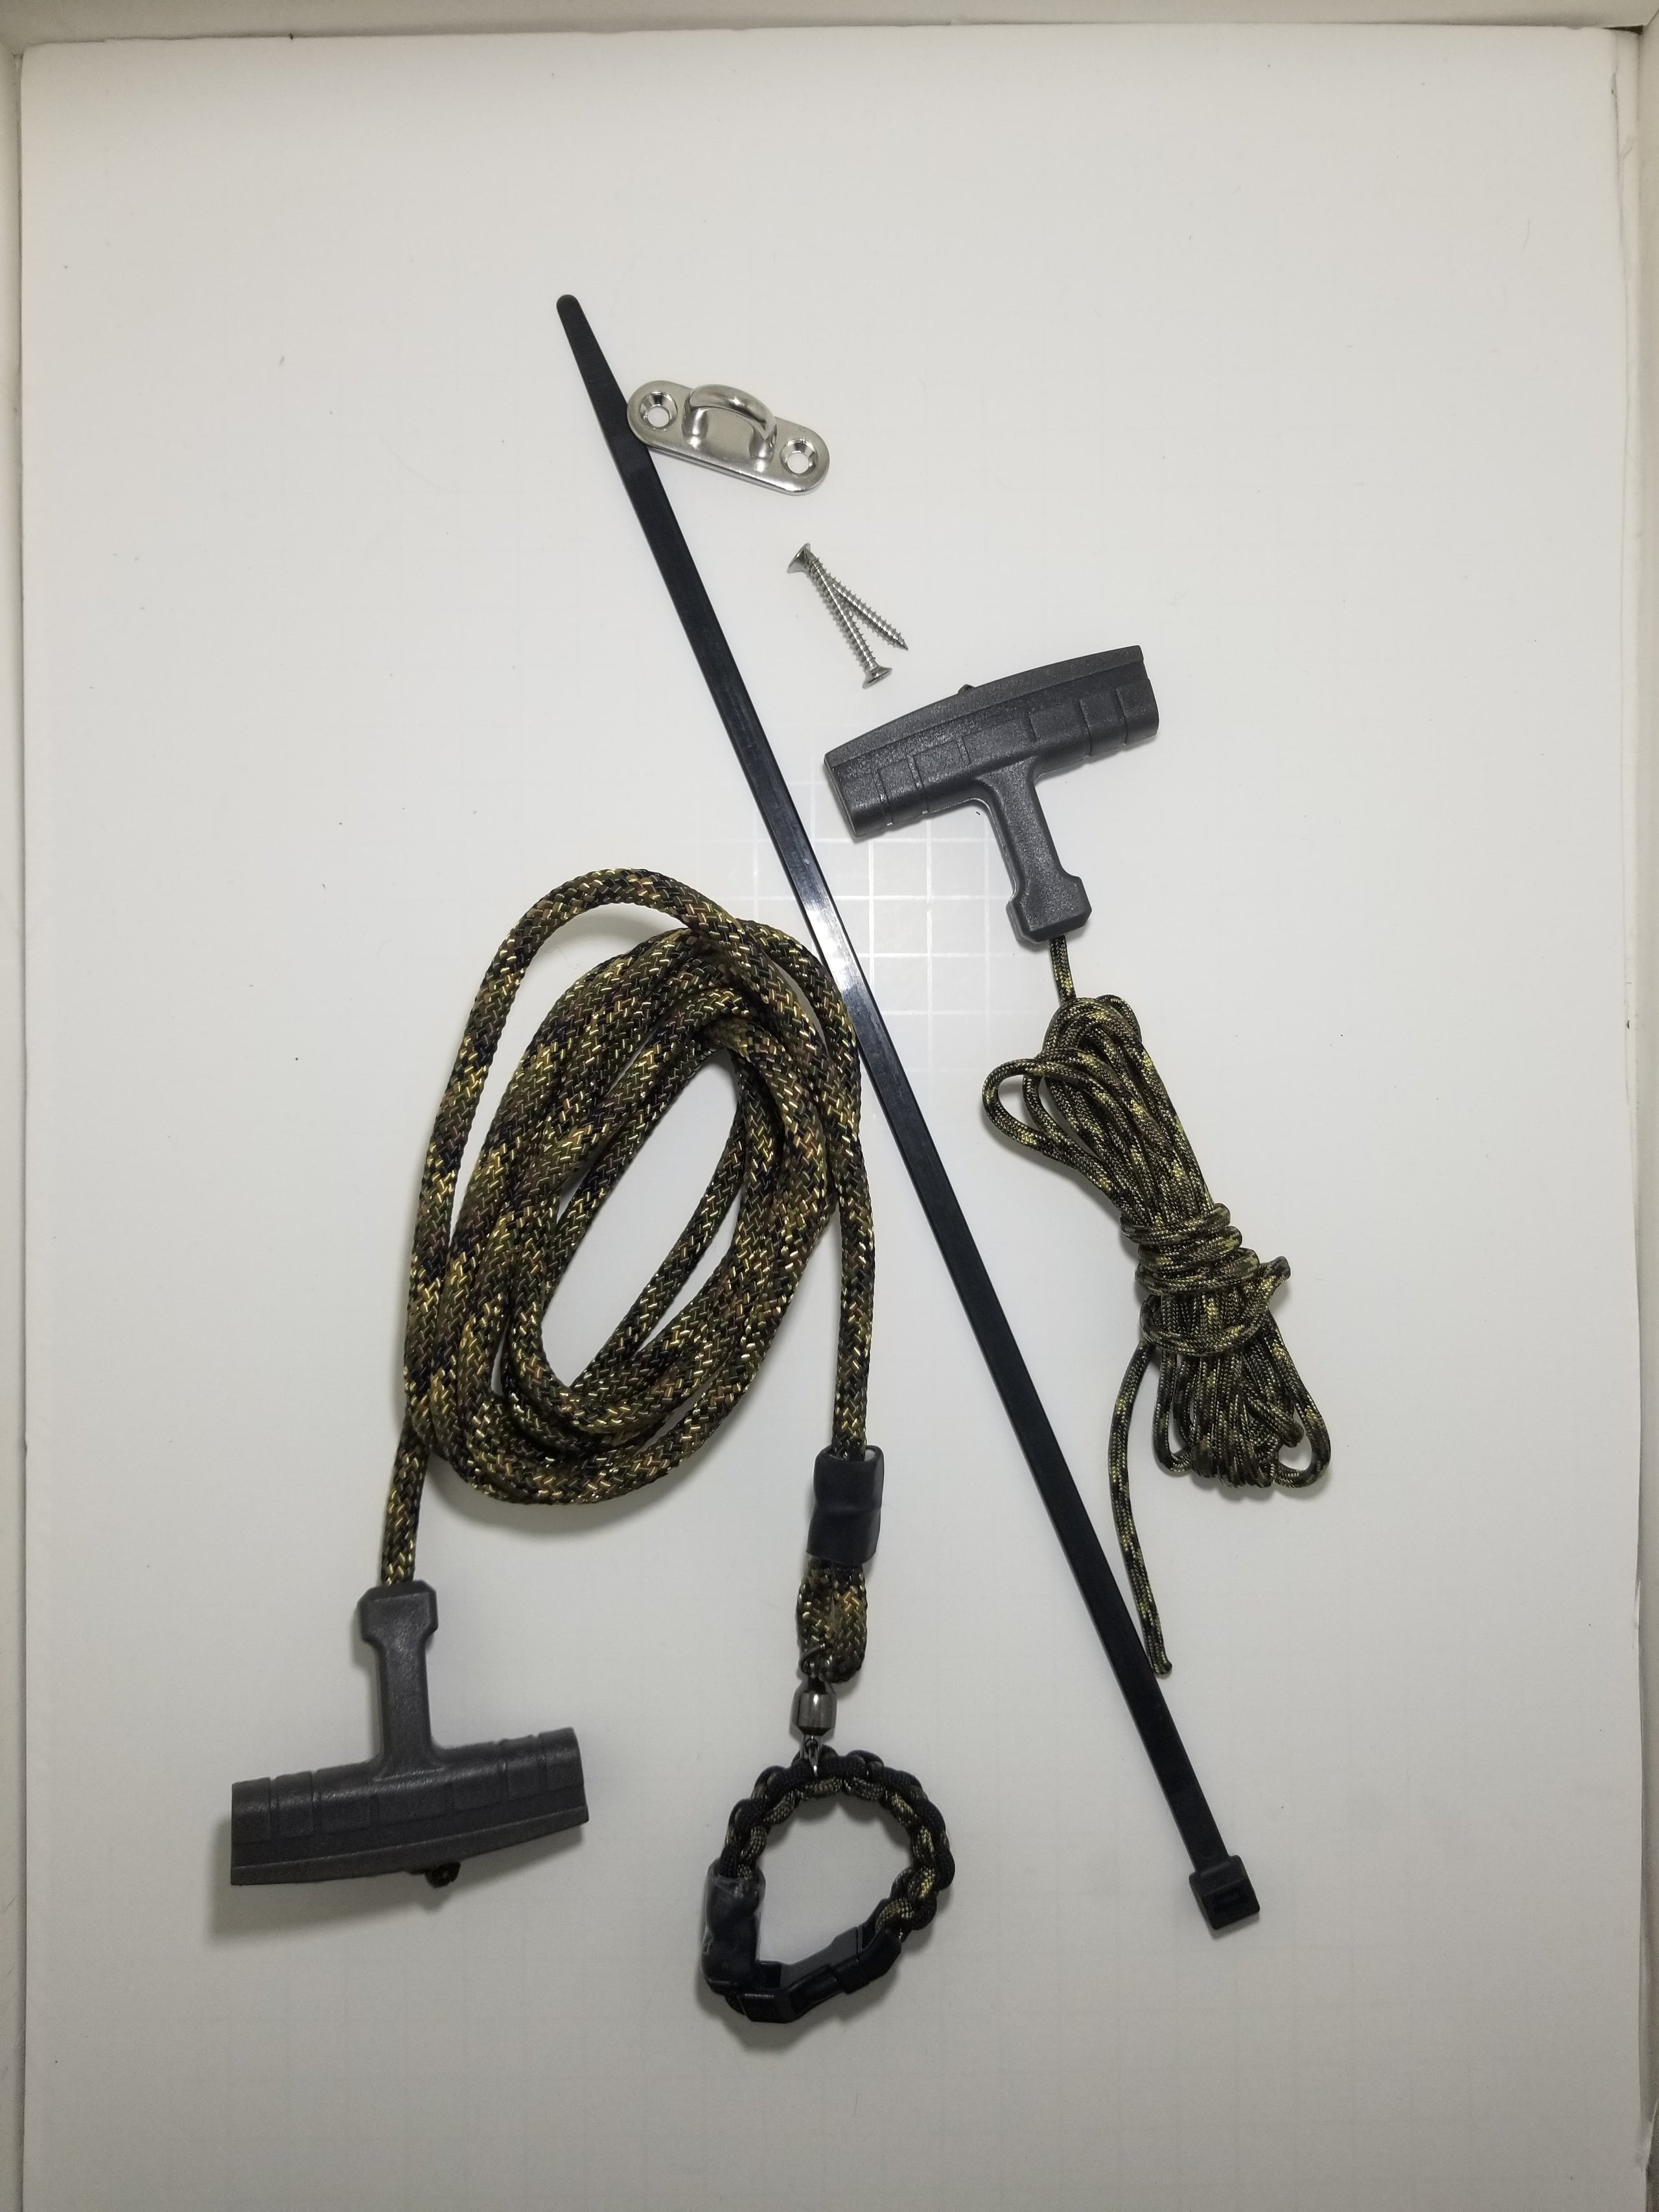 Trolling Motor Deployment and Recovery Rope Kit